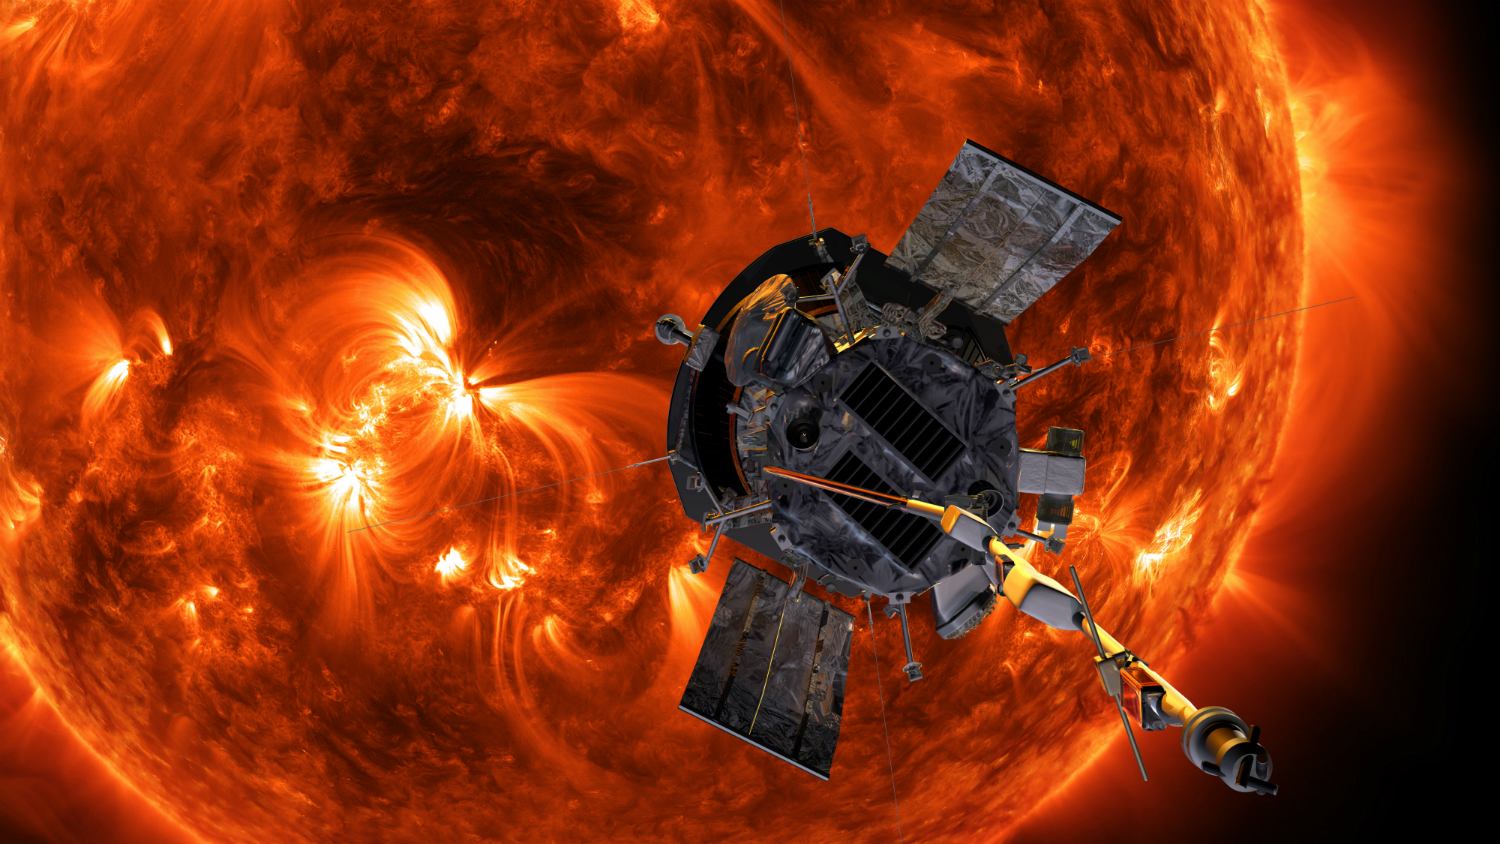 NASA's Parker Solar Probe is currently the fastest spacecraft ever launched.